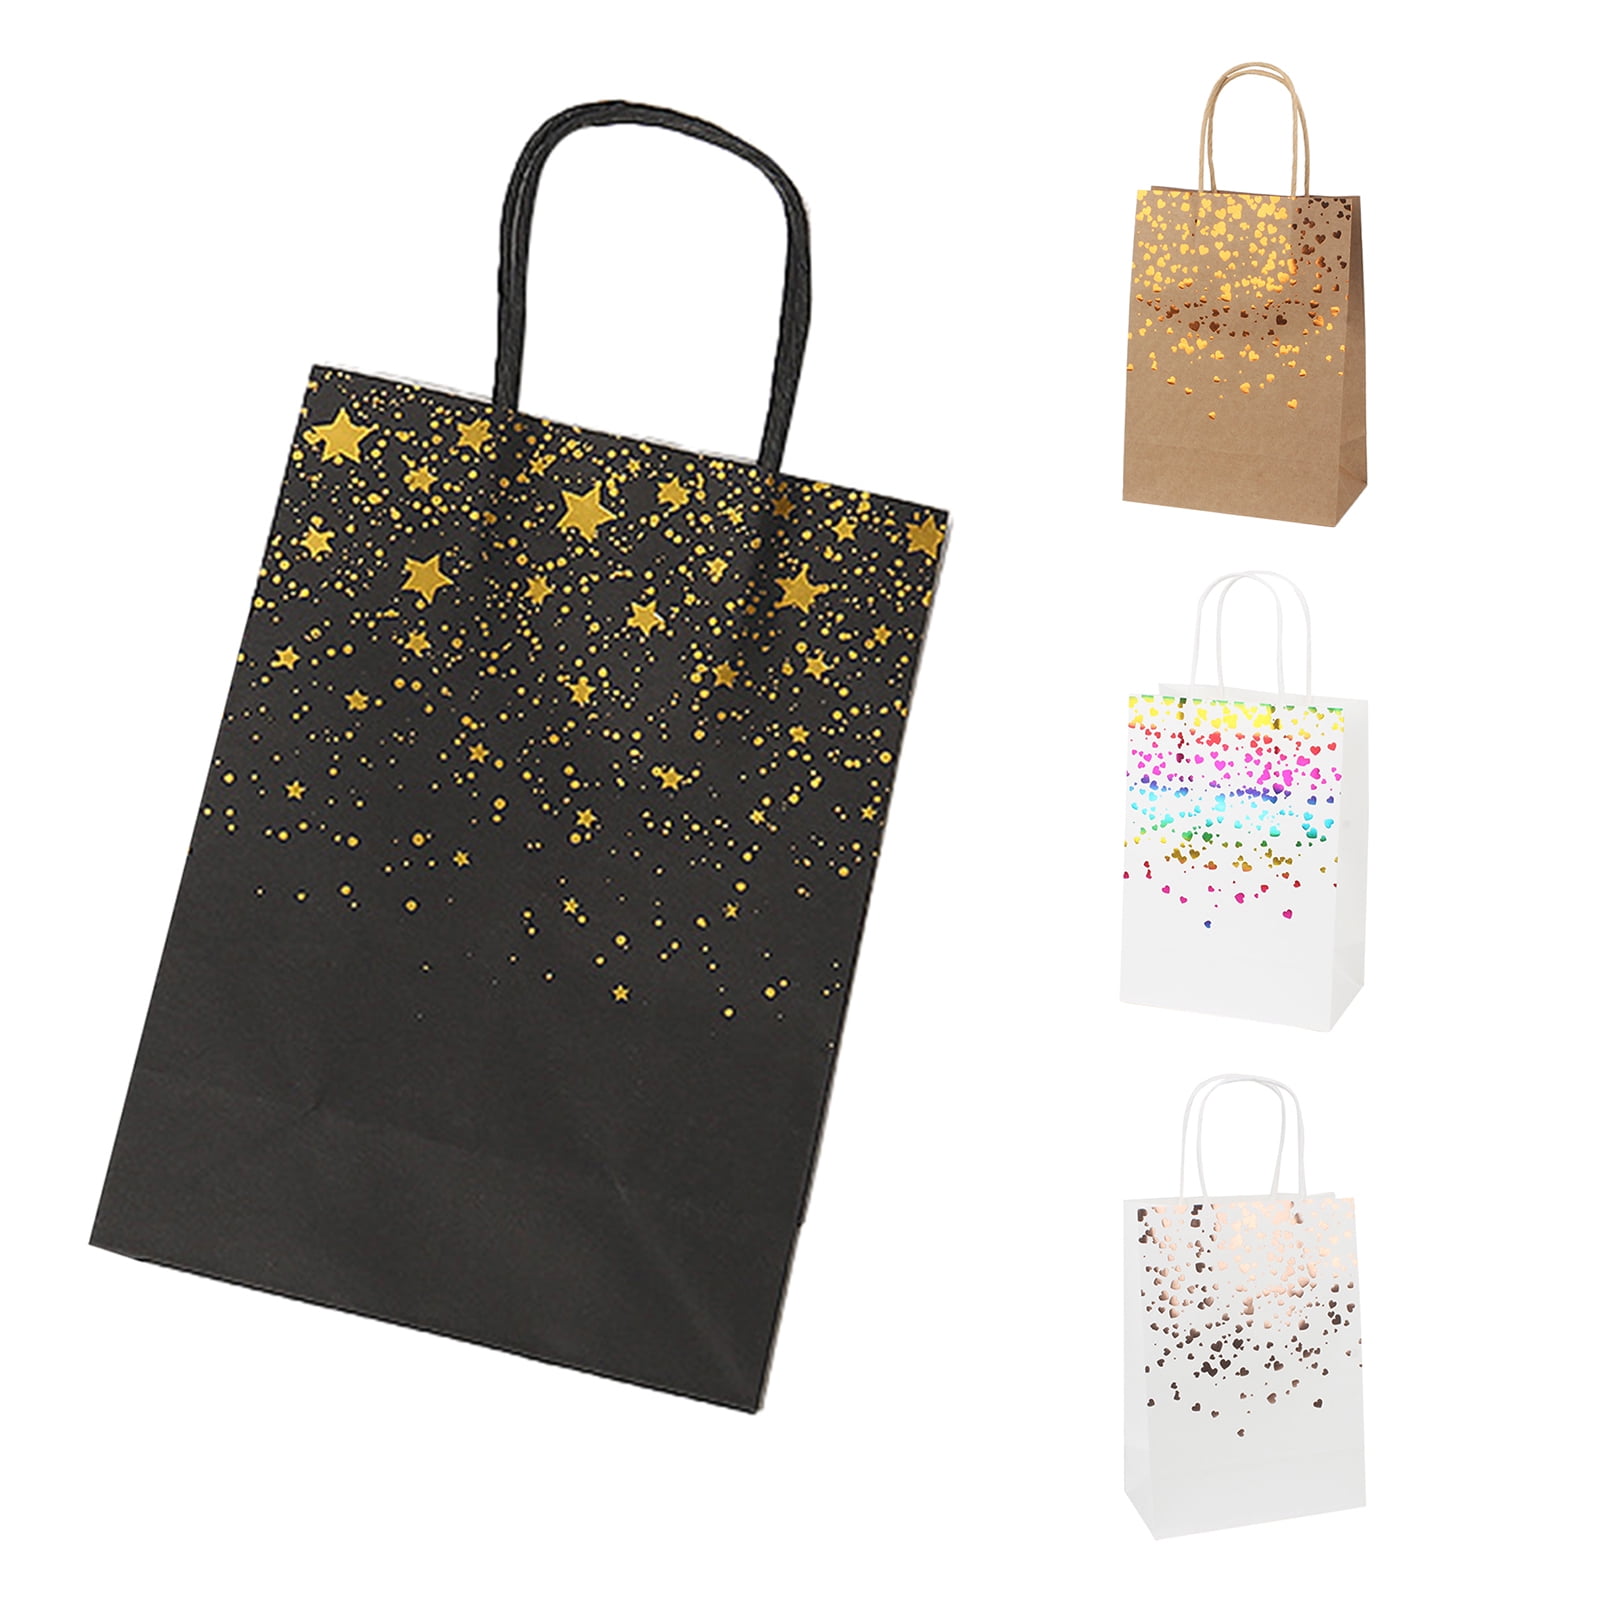 5 x Gold Paper Party Gift Bags ~ Boutique Shop Loot Carrier Bag SIZE A4 